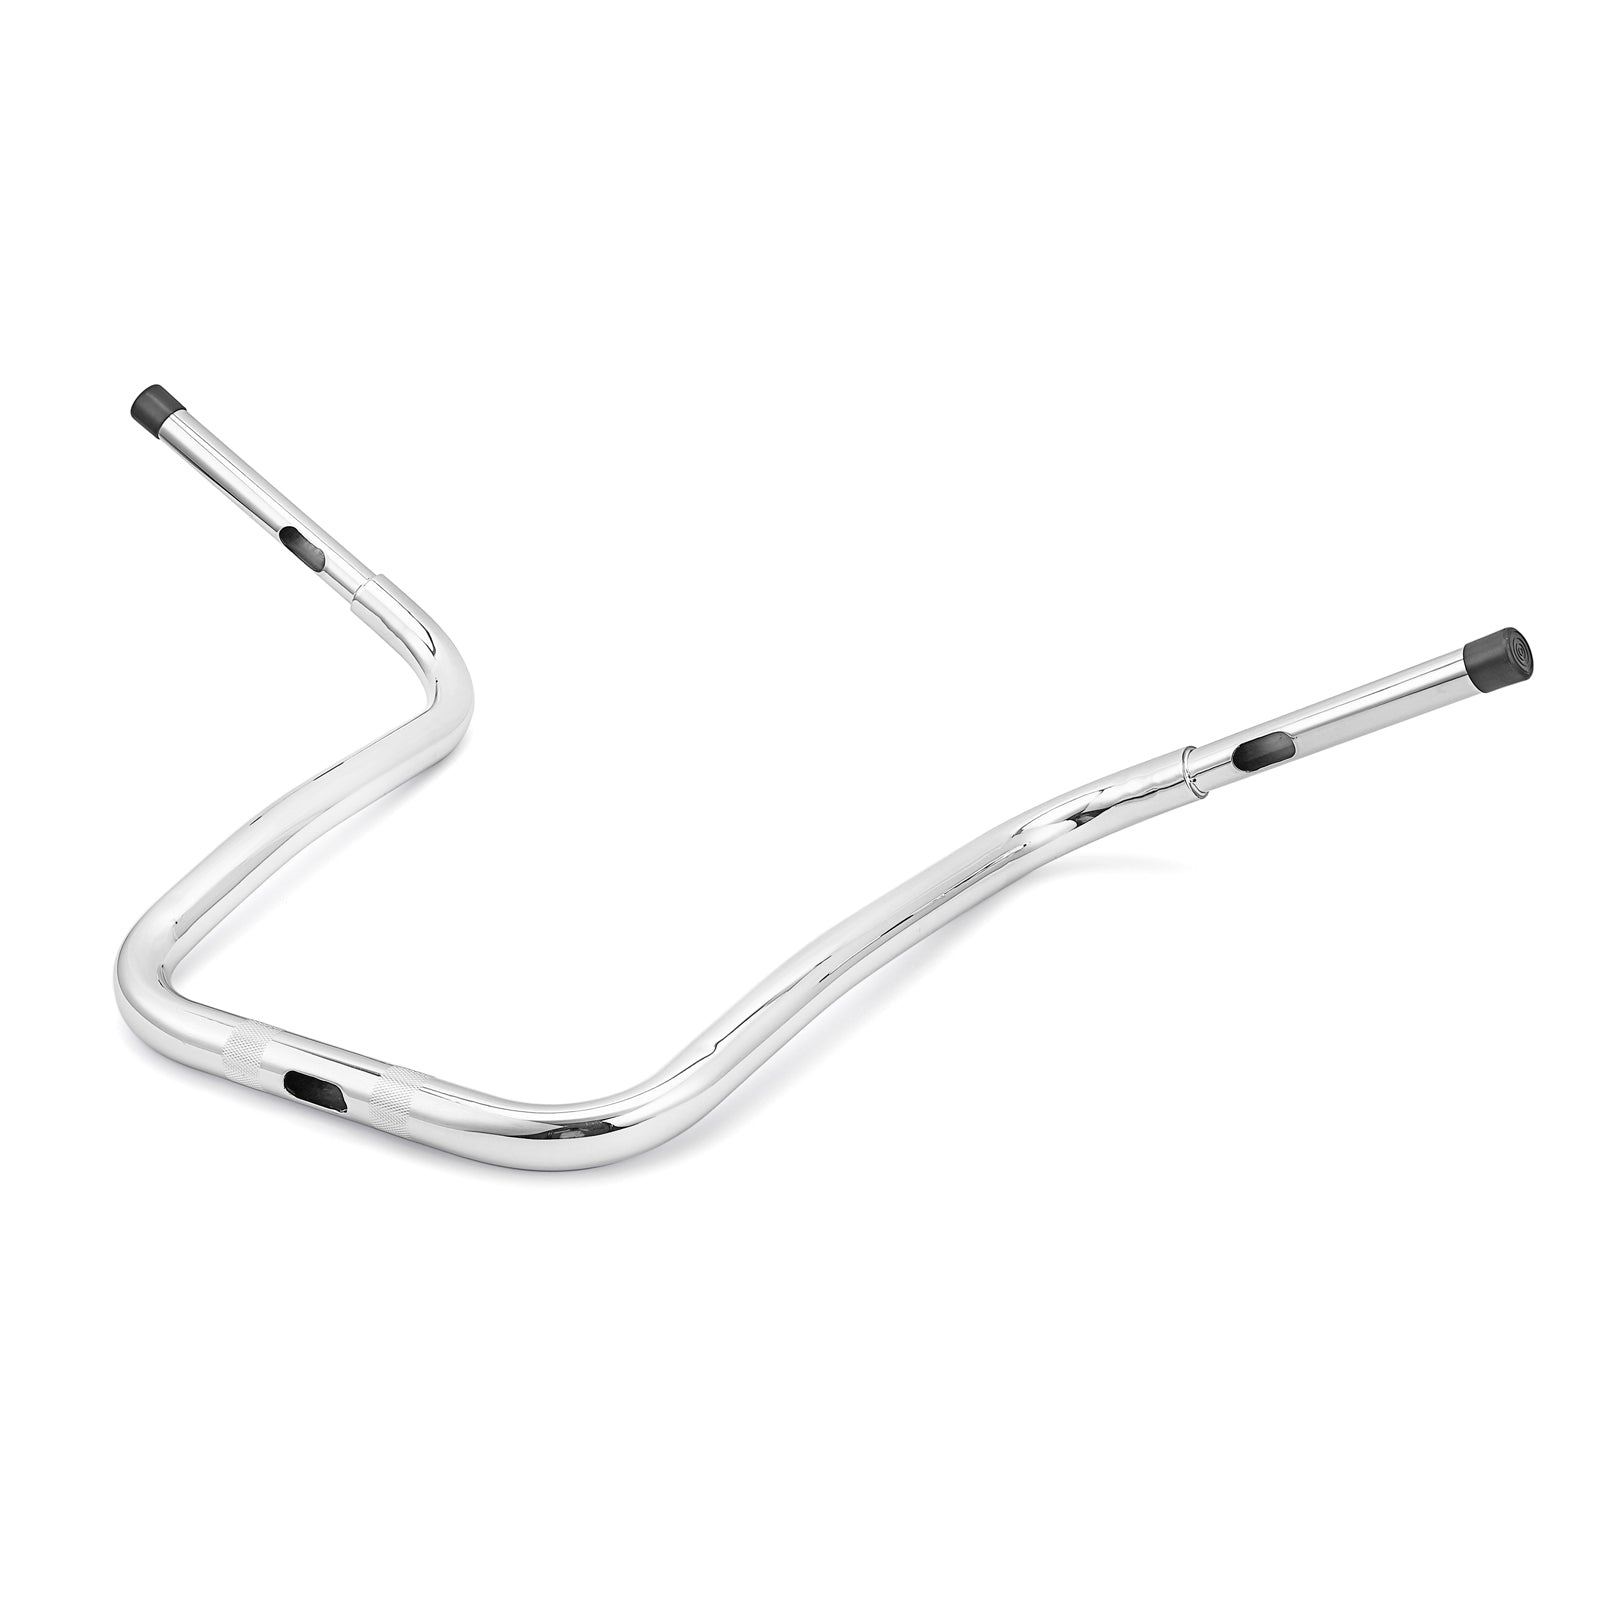 Harley Touring Road Glide Touring Road King Special FLHRXS 1.25" Clamp Ape Gangster Monkey Bar Handlebar-3